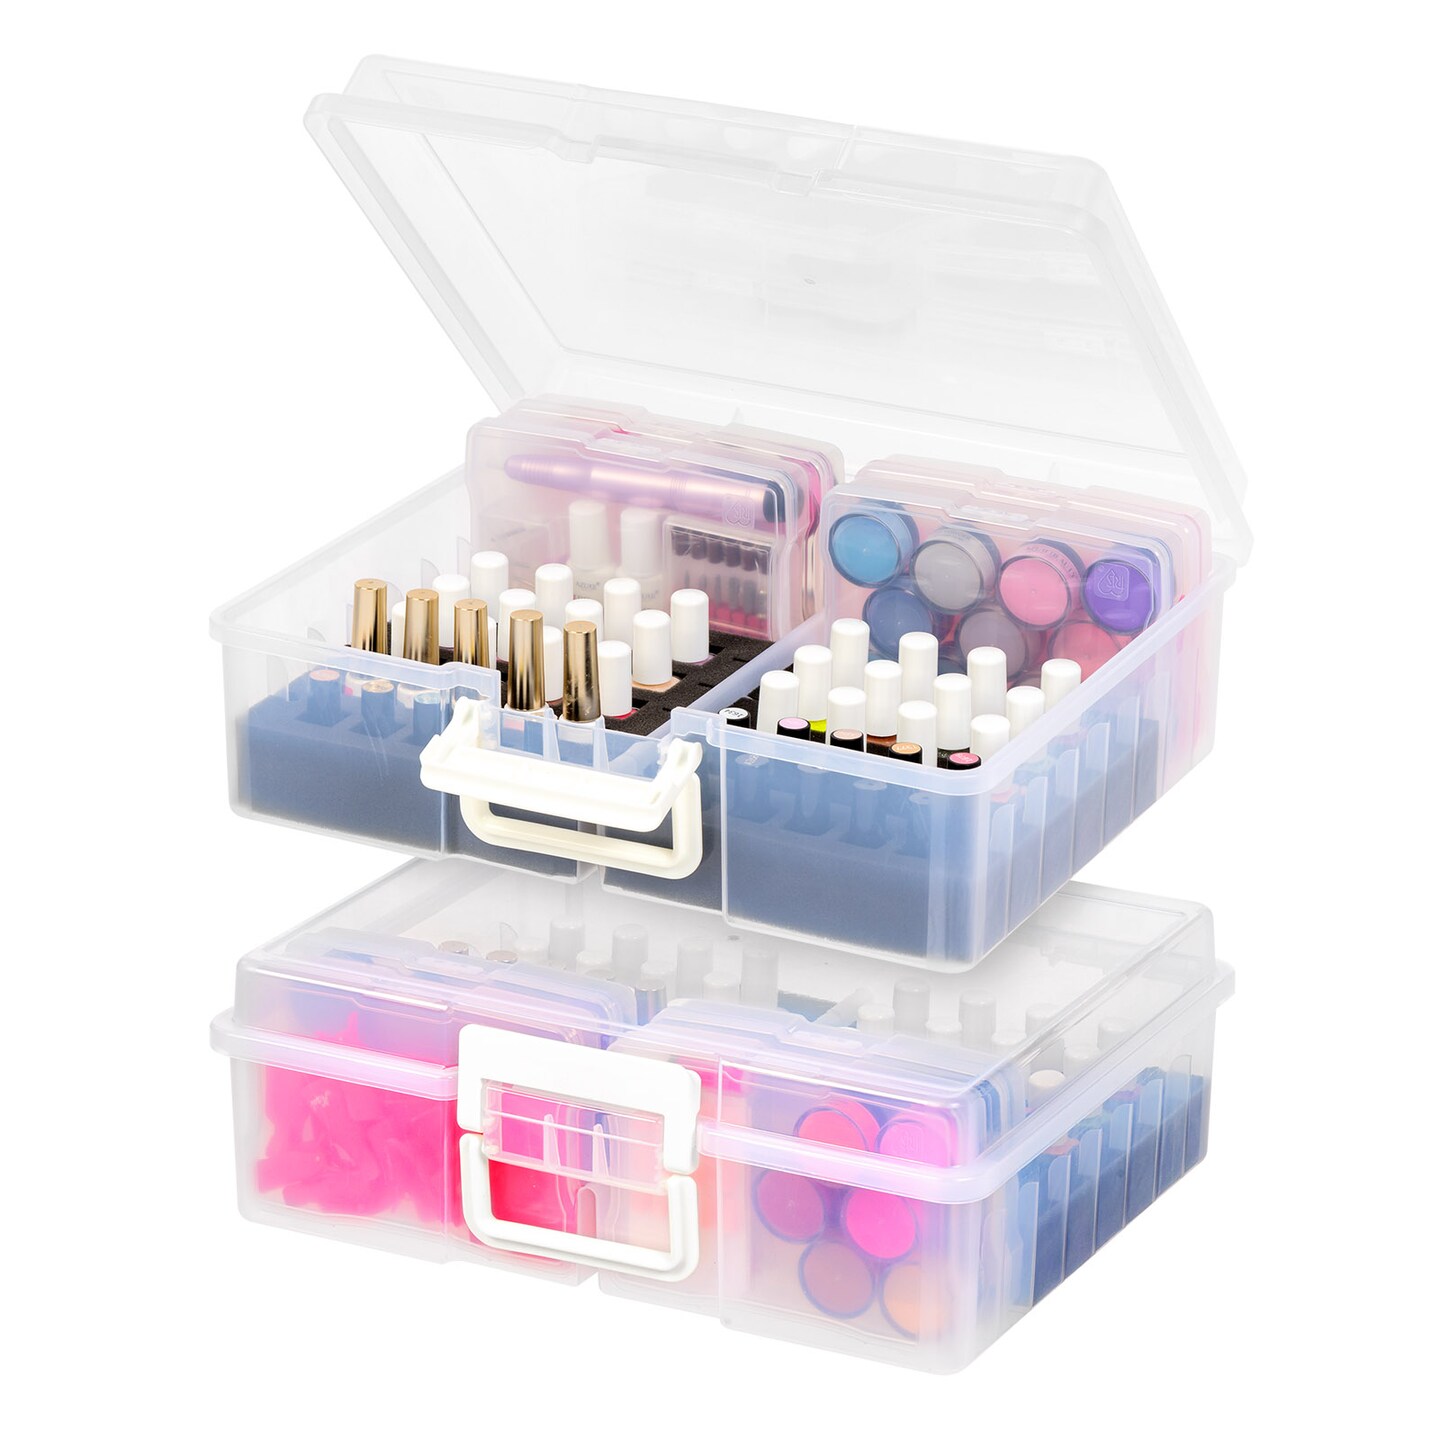 Washi Tape Storage Keeper by Simply Tidy™